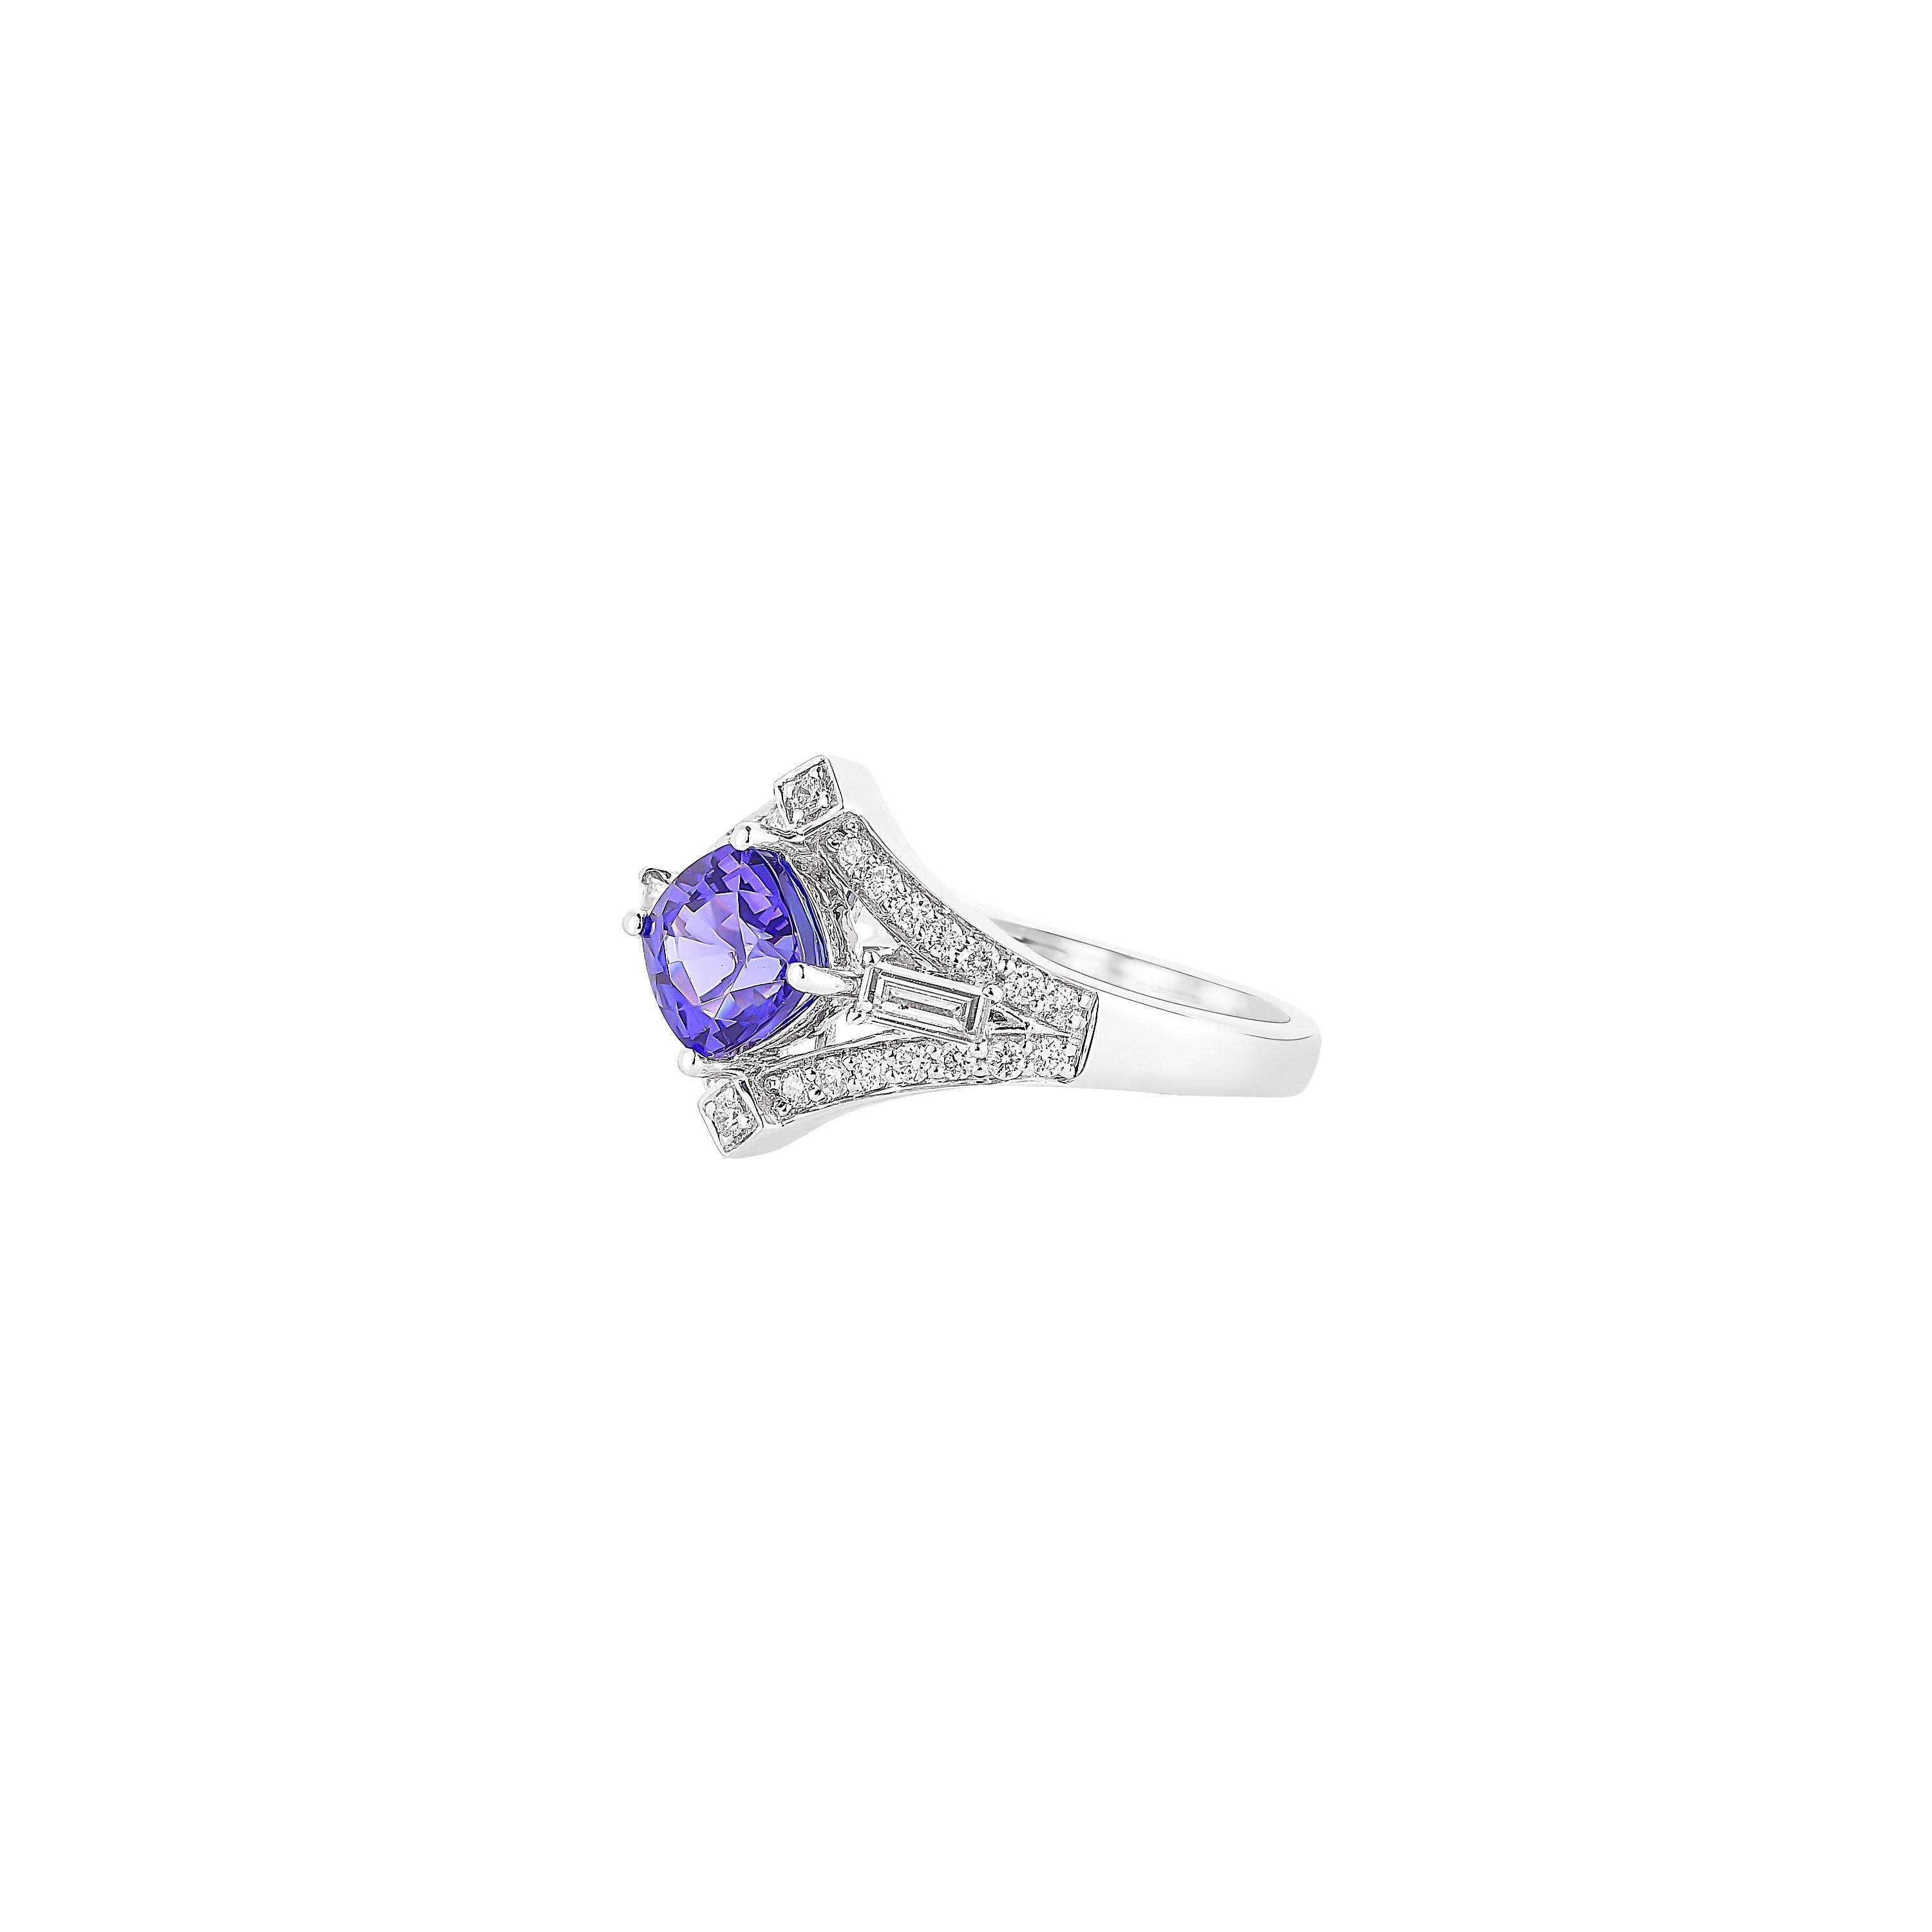 This collection features a selection of the most tantalizing Tanzanites. This enchanting East African gemstone can only be procured from one mine in the foothills of Mount Kilimanjaro, Tanzania. We have accented the rich purple-blue hues of this